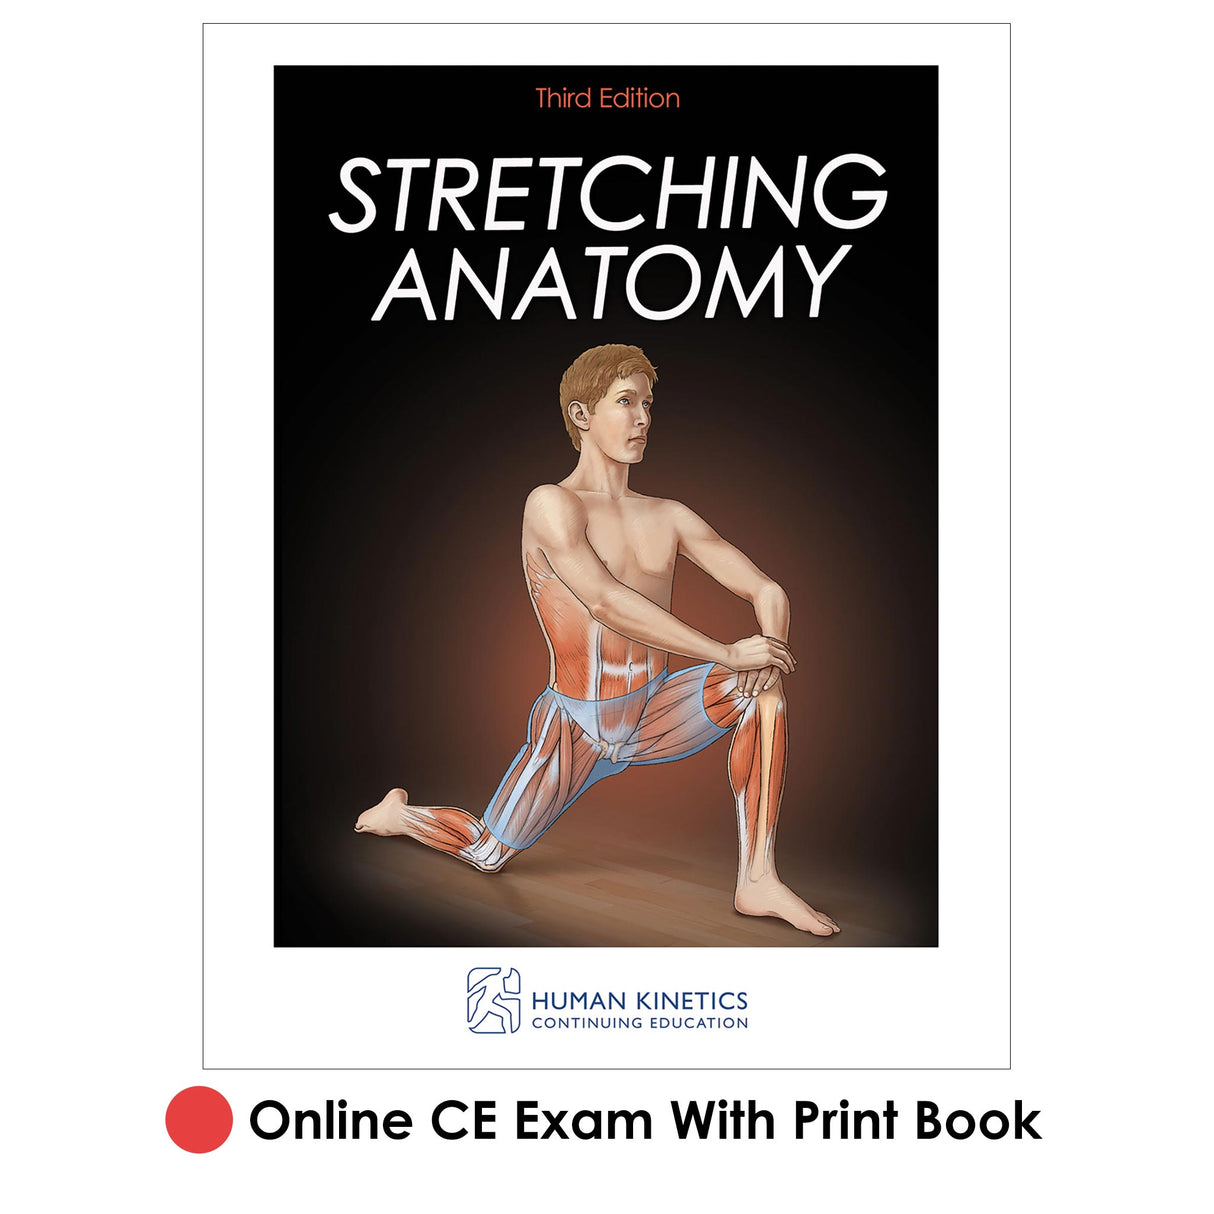 Stretching Anatomy 3rd Edition Online CE Exam With Print Book